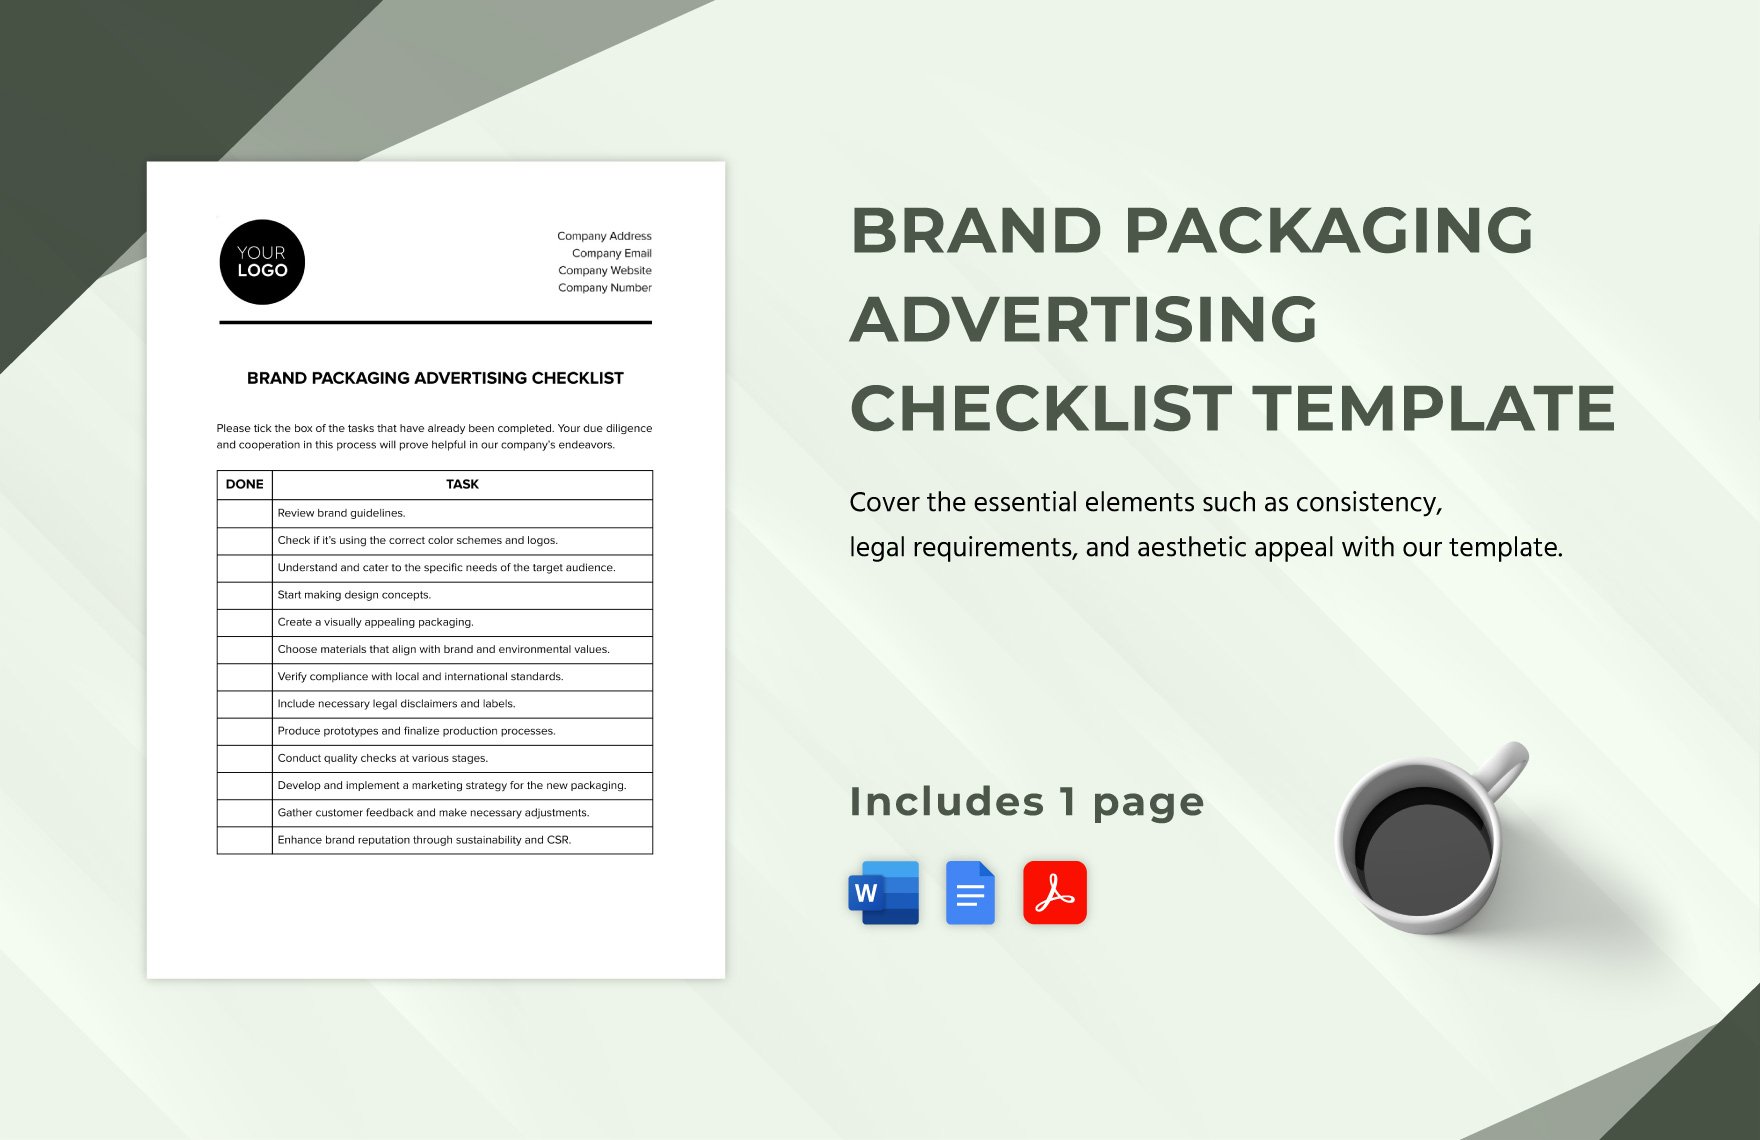 Brand Packaging Advertising Checklist Template in Word, Google Docs, PDF